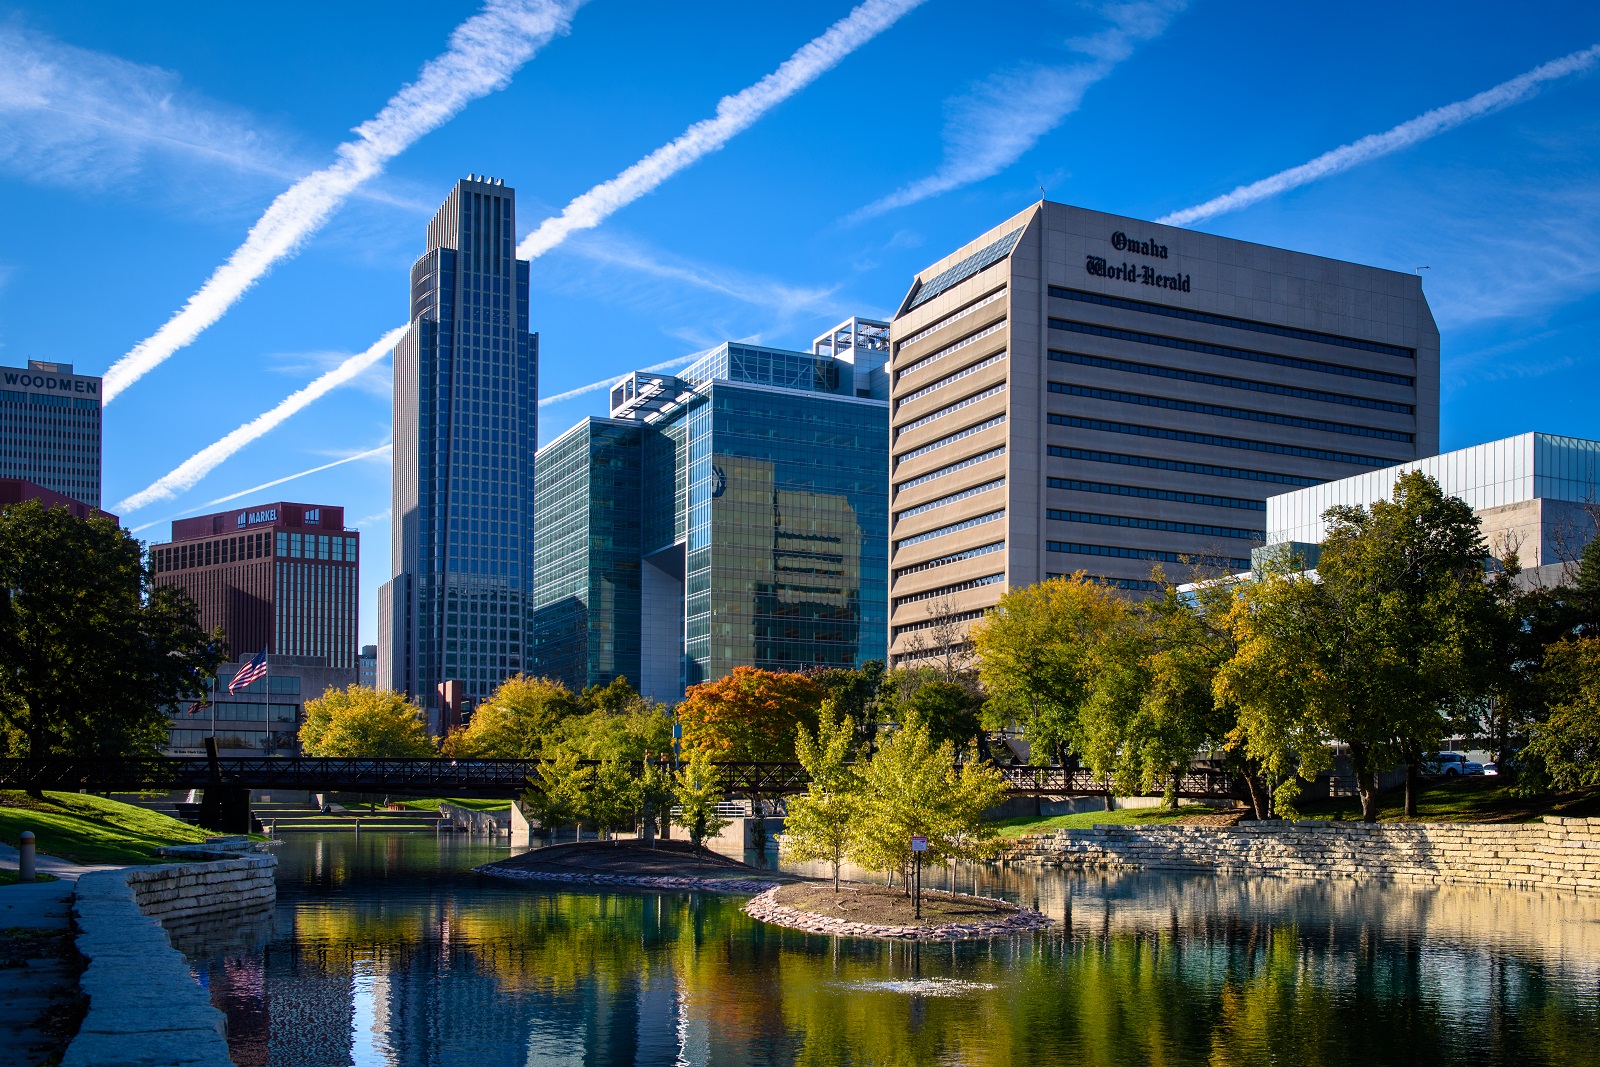 <p class="wp-caption-text">Image Credit: Shutterstock / Kristopher Kettner</p>  <p><span>Omaha’s well-maintained roads and light traffic make it one of the more pleasant major cities for driving in the U.S.</span></p>